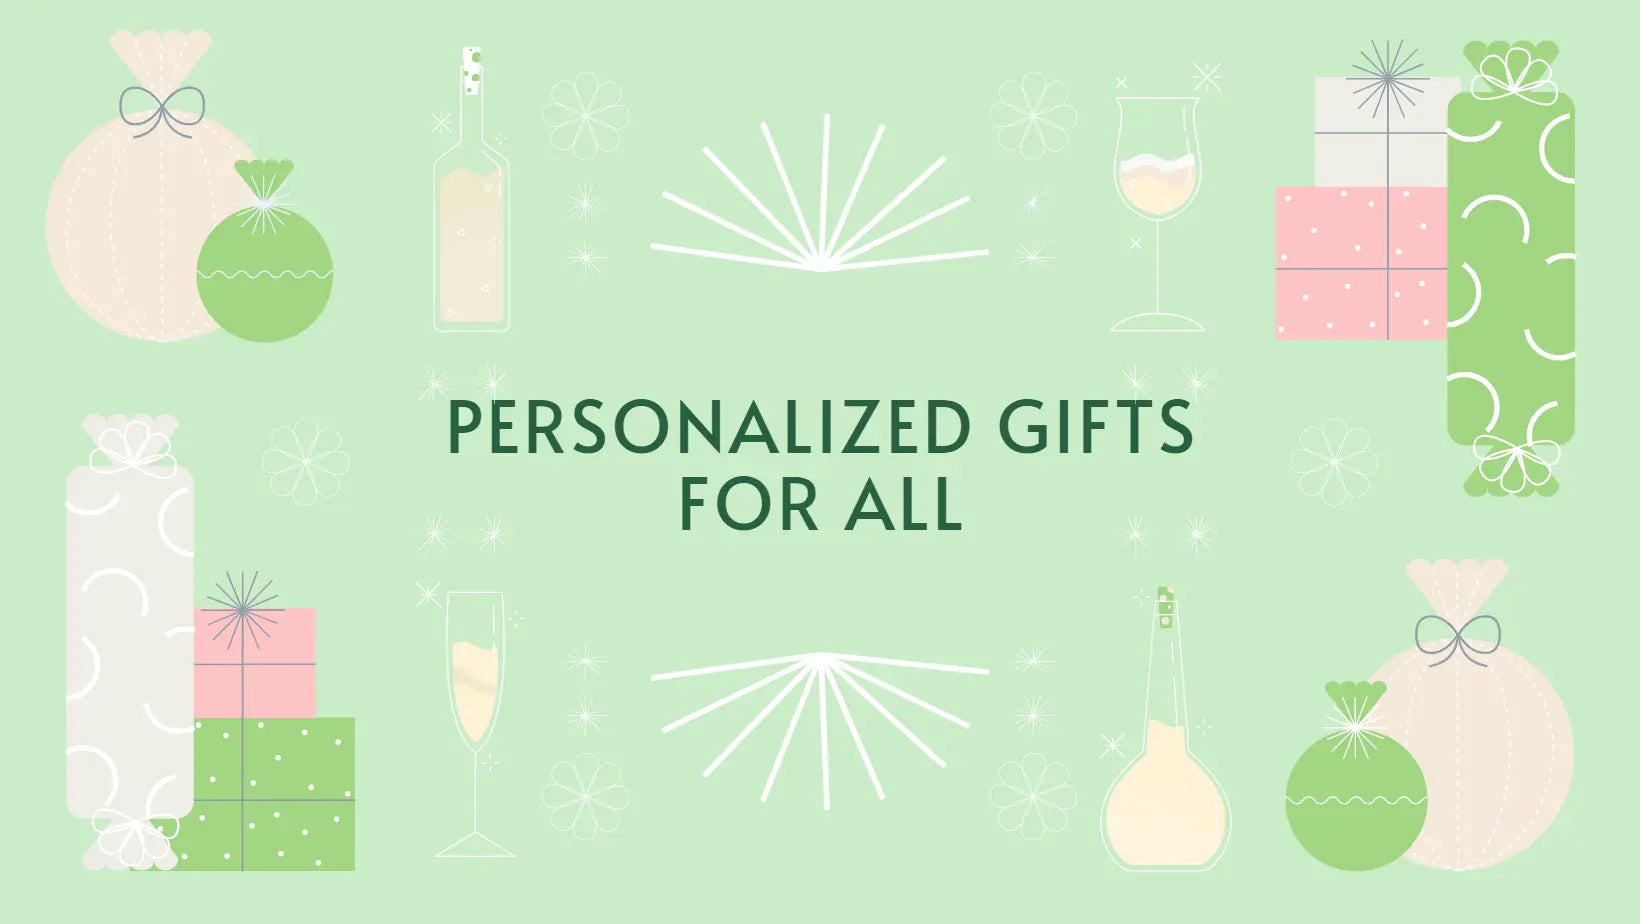 Personalized gifts for all